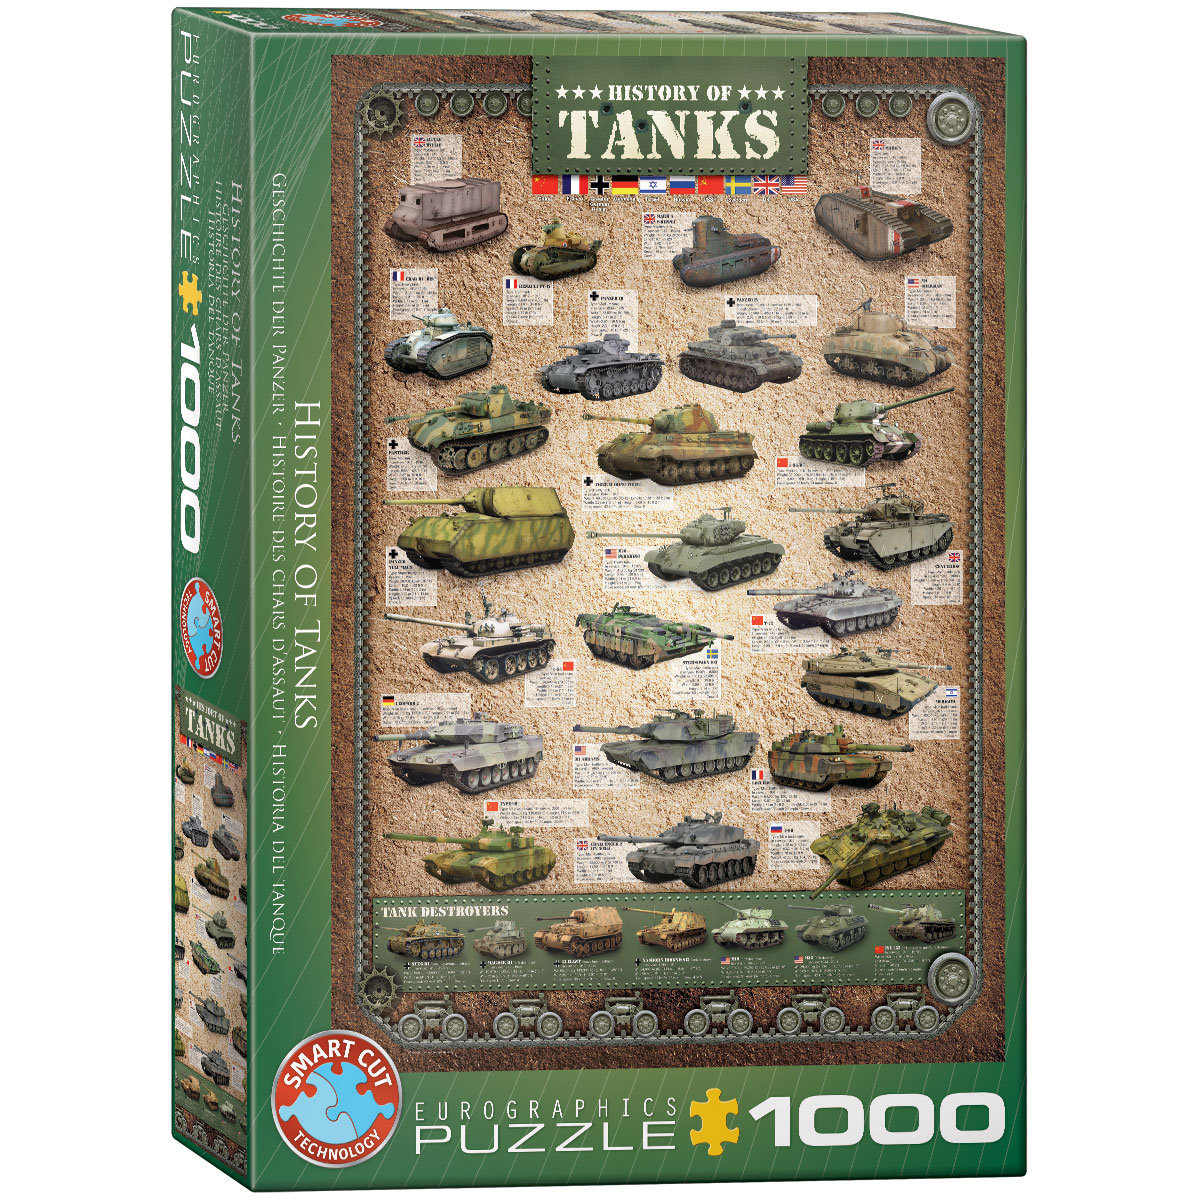 Eurographics Puzzle 1000 History of Tanks 6000-0381 -